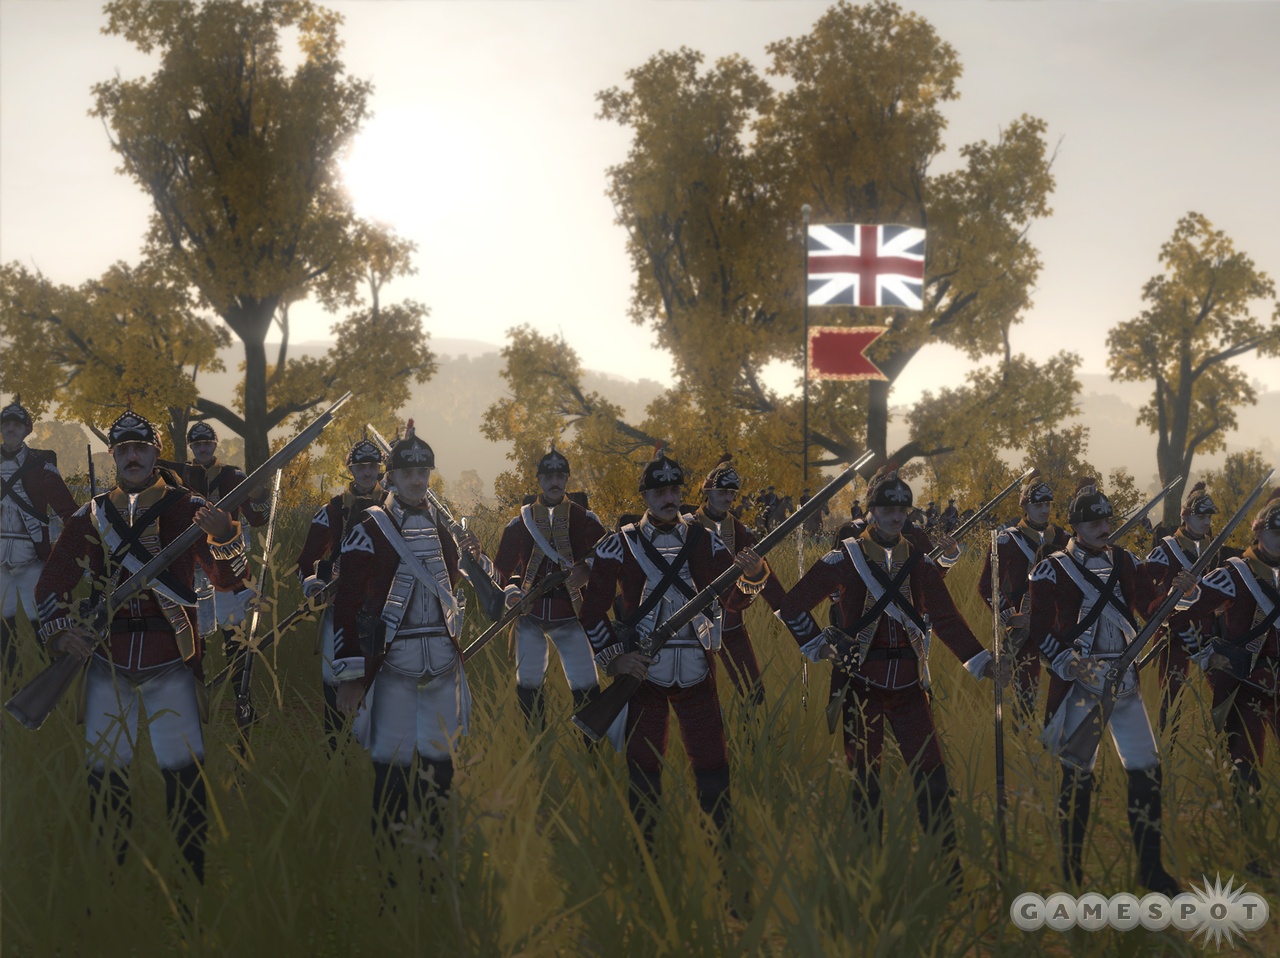 Each faction will have its own specialized units, such as the highly trained British Redcoats.